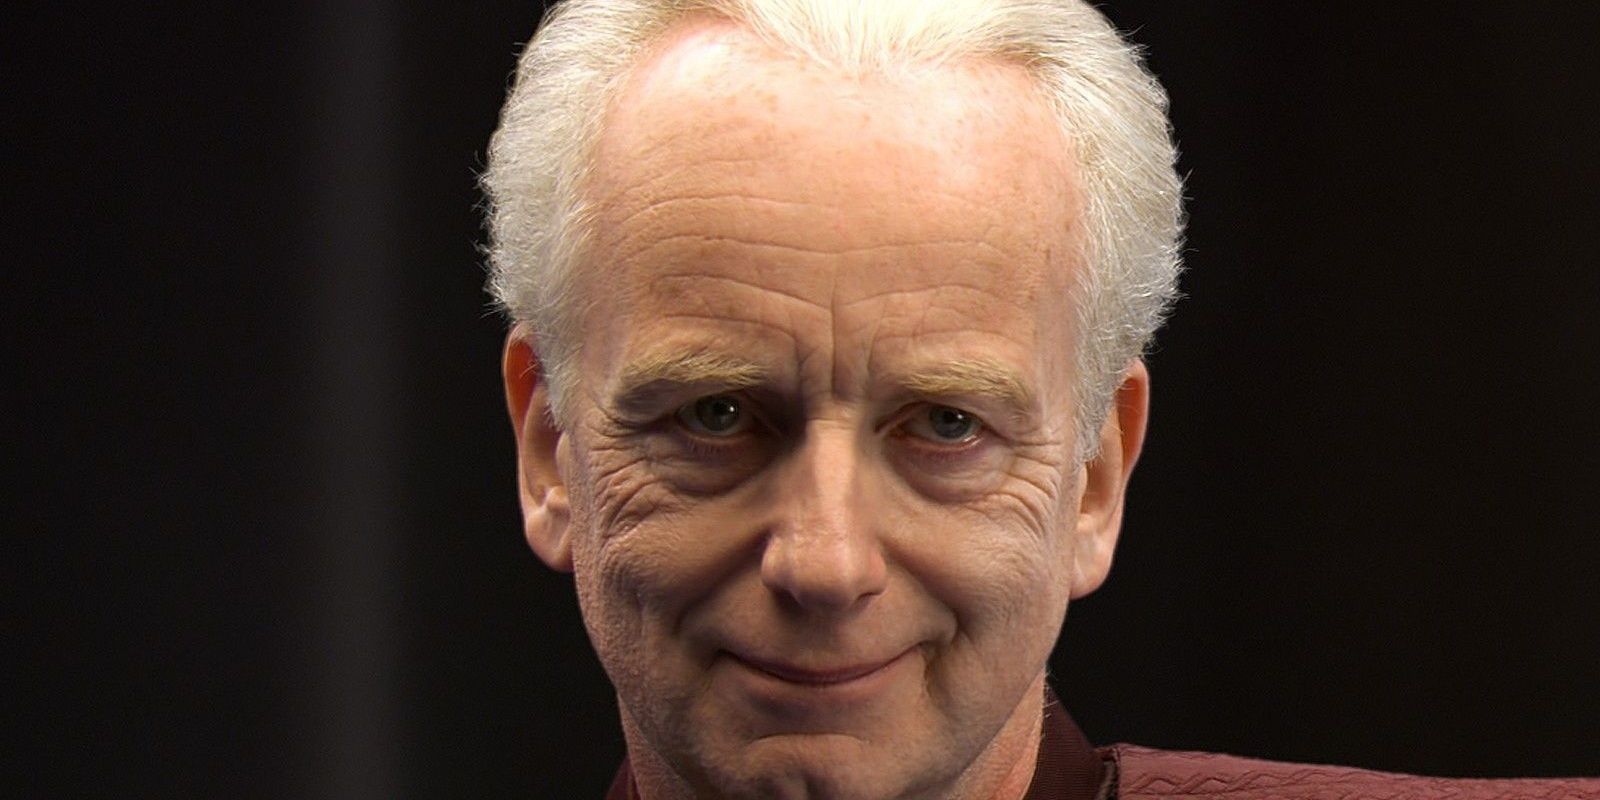 Supreme Chancellor Sheev Palpatine in Star Wars Revenge Of The Sith